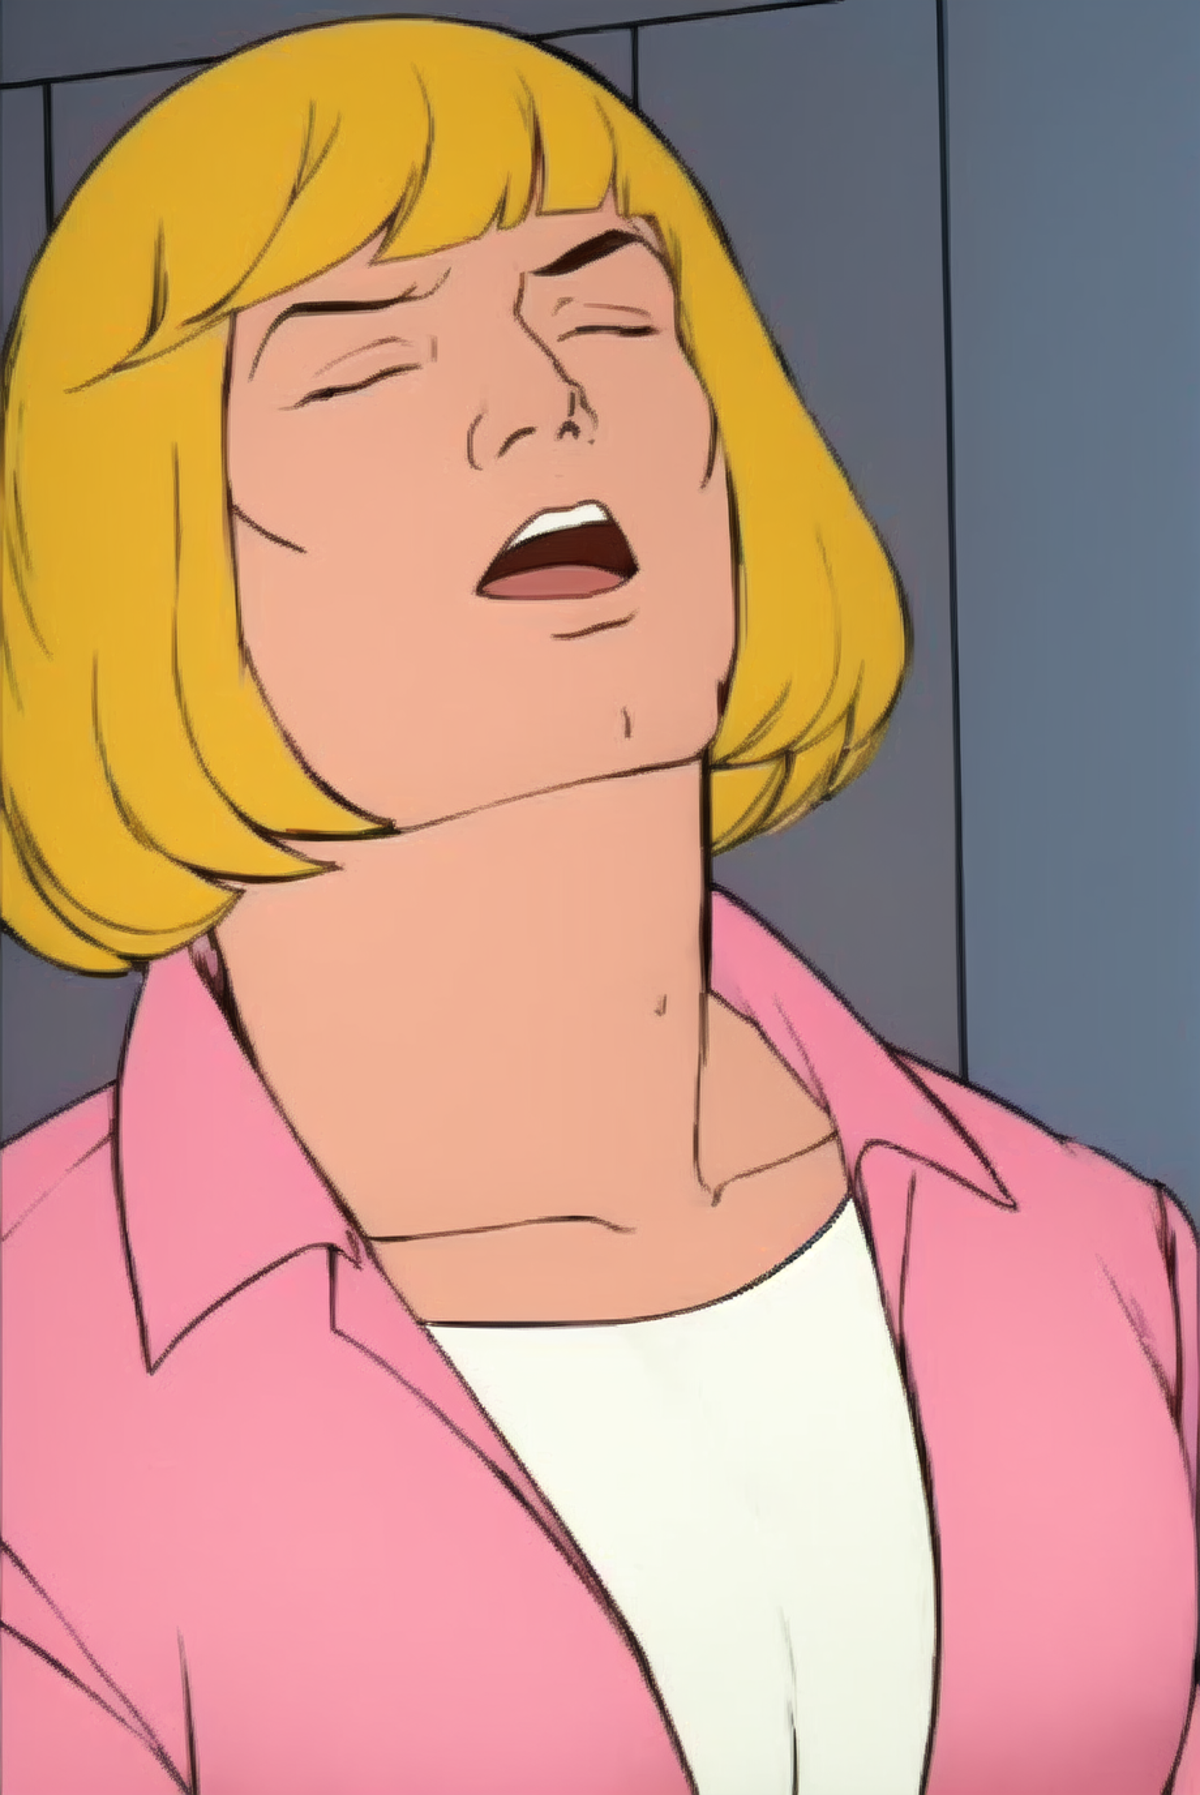 A cartoon drawing of a woman with blonde hair, a pink shirt, and a pink collar, with her mouth open.